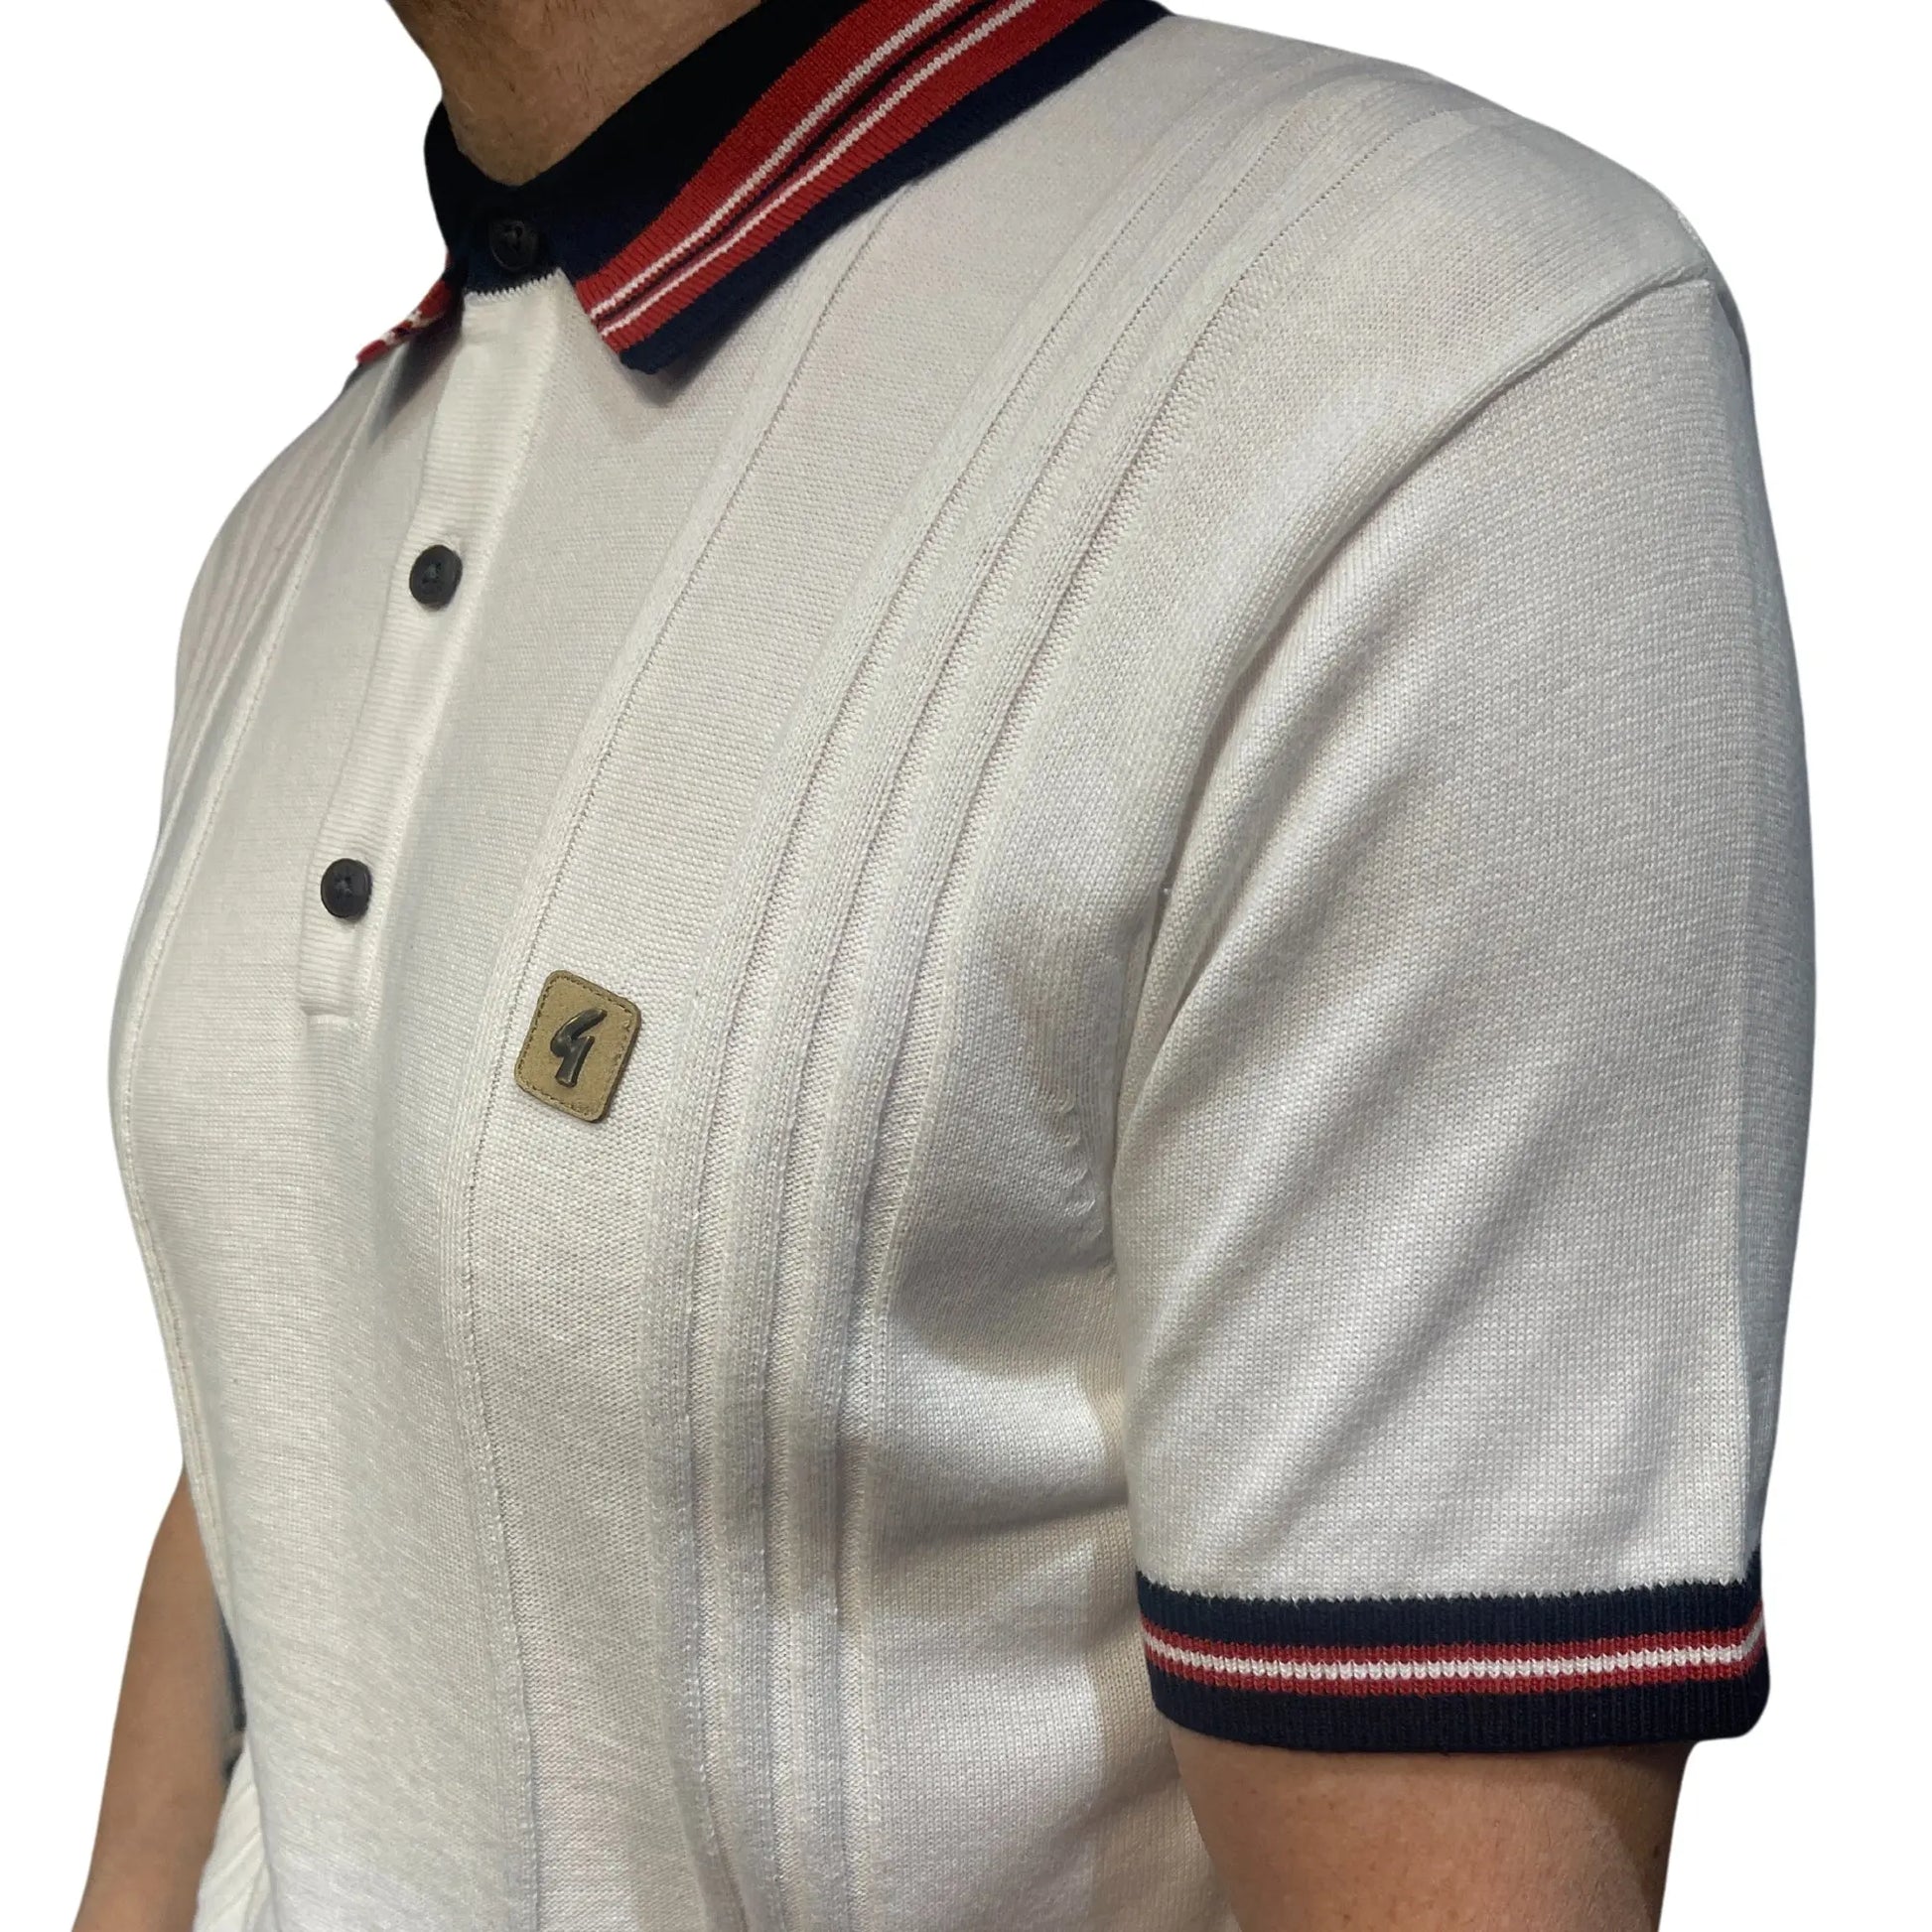 Buy Gabicci Vintage Canto Knitted Polo Shirt - White | Short-Sleeved Polo Shirtss at Woven Durham